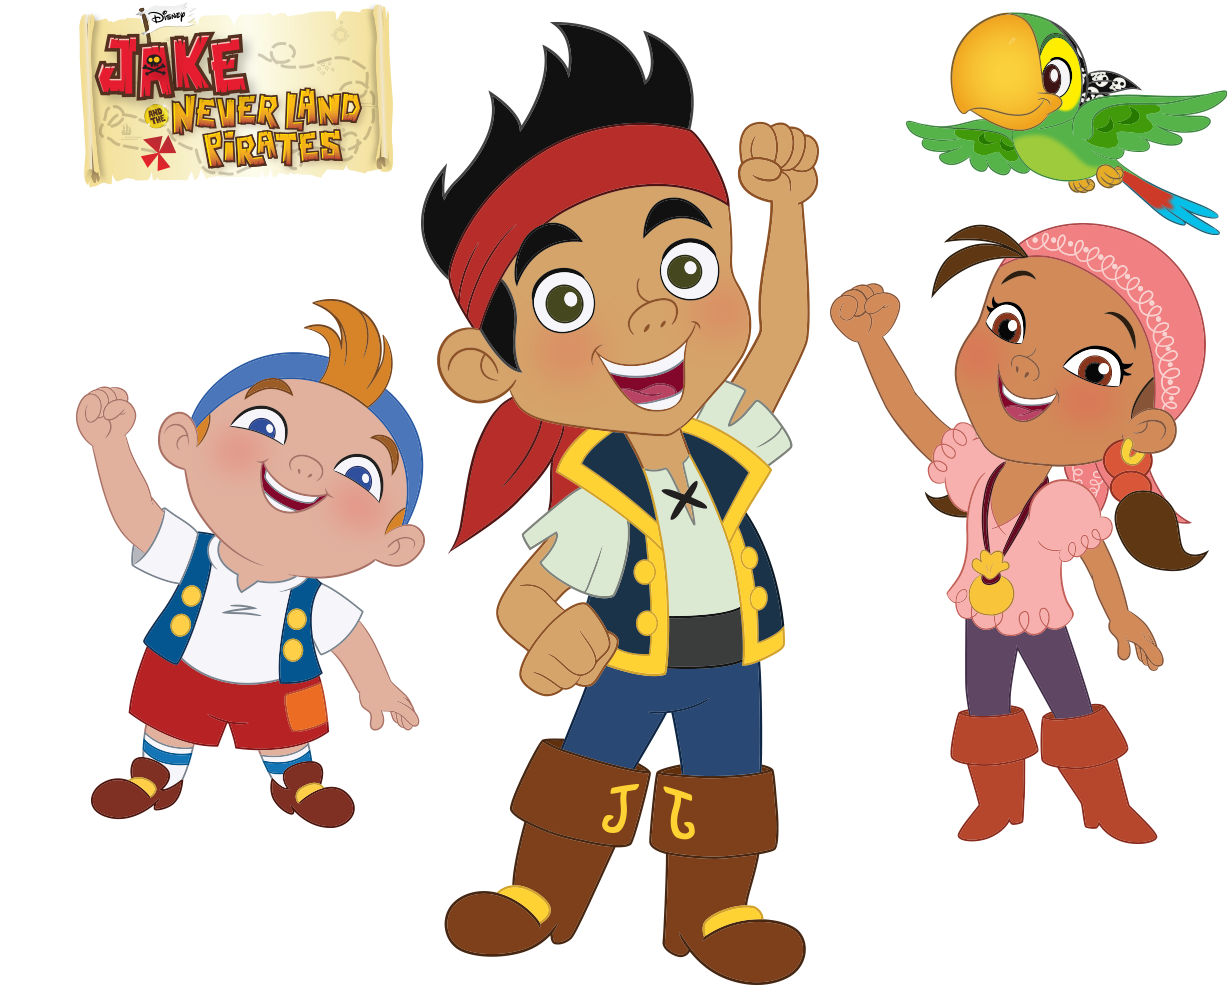 Disney's Jake and the Neverland Pirates show.